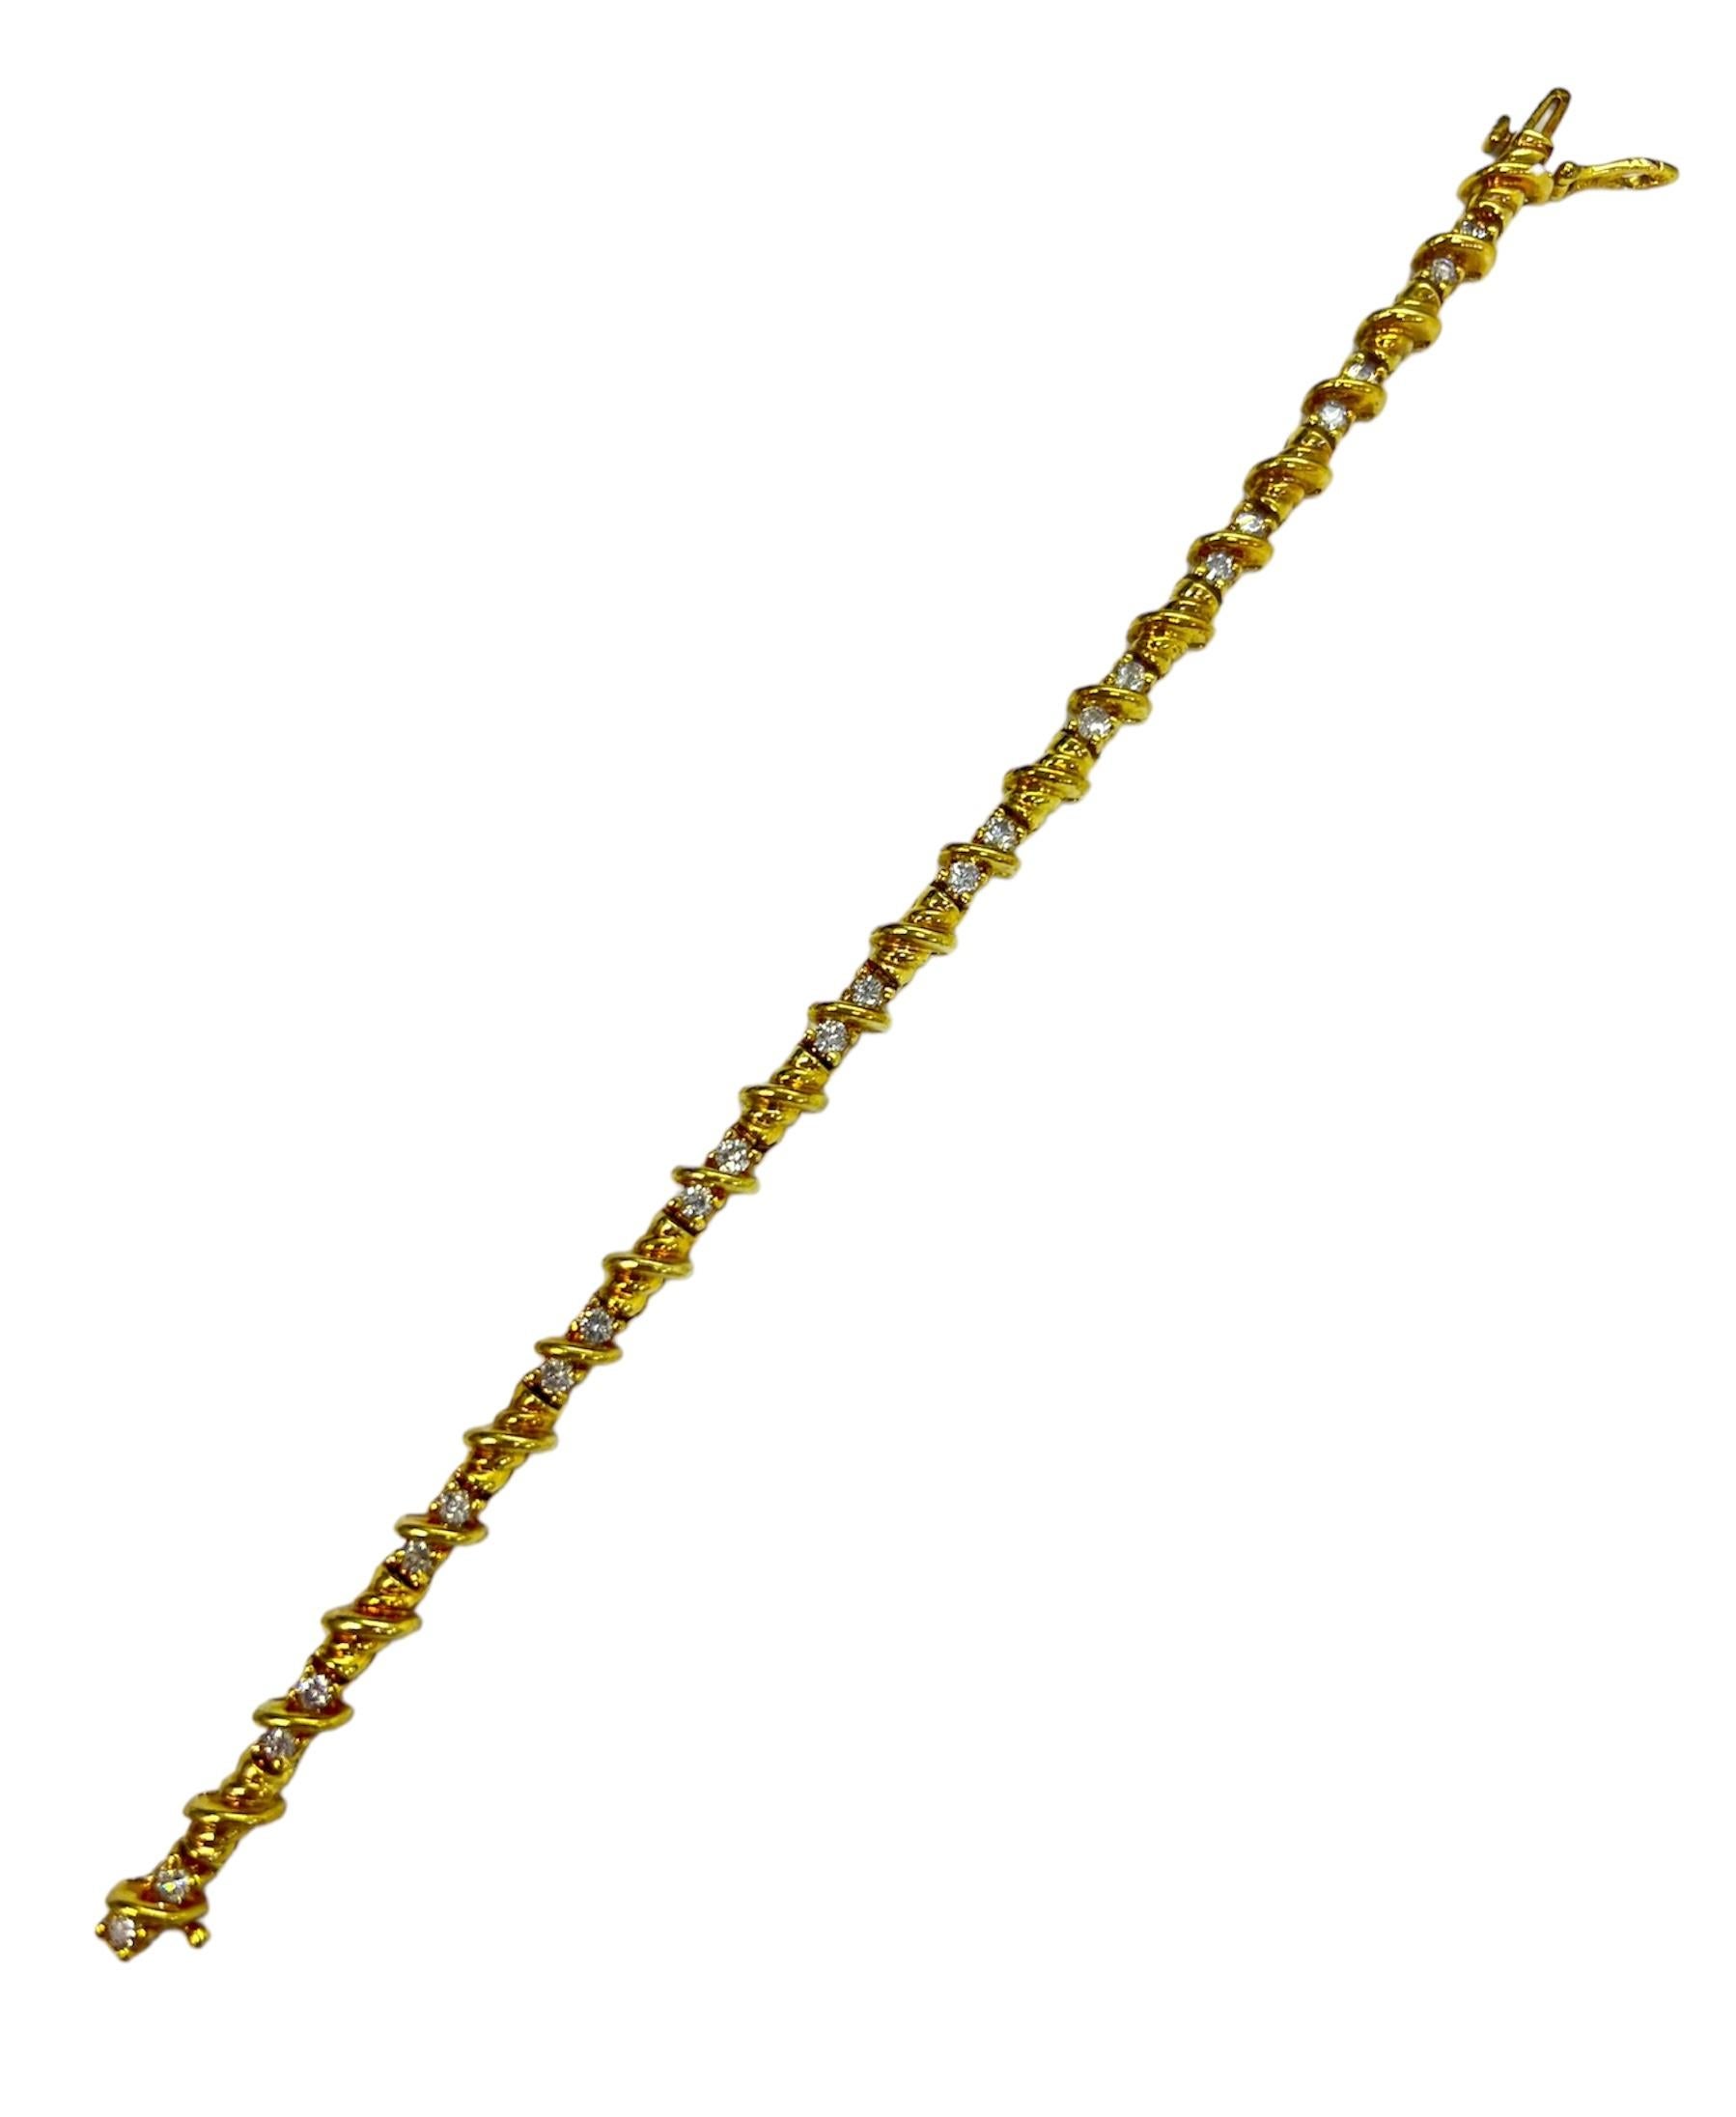 14K yellow gold bracelet with diamonds.

Sophia D by Joseph Dardashti LTD has been known worldwide for 35 years and are inspired by classic Art Deco design that merges with modern manufacturing techniques.
